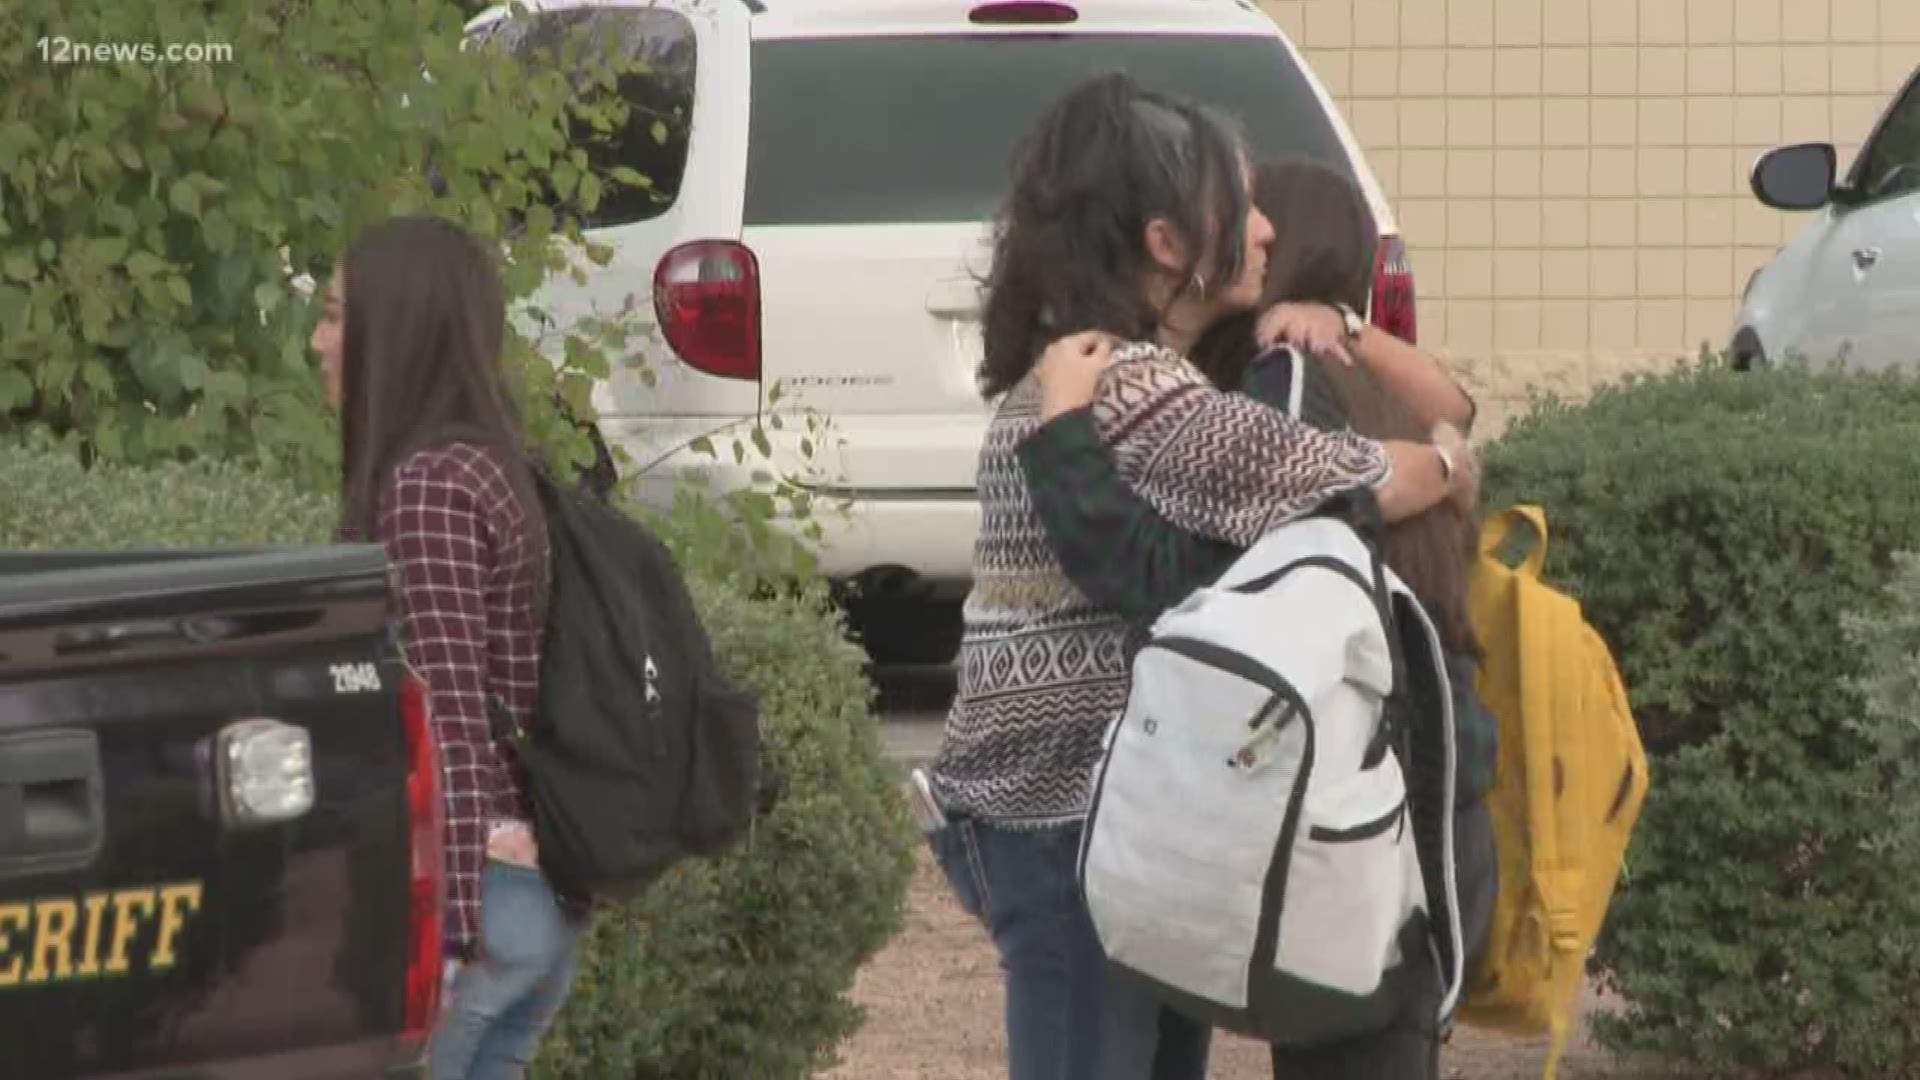 On the 6th anniversary of the mass shooting at Sandy Hook Elementary, a hoax call was made from Apache Junction High School. One teen is believed to be responsible for the phony phone call, and is in custody.